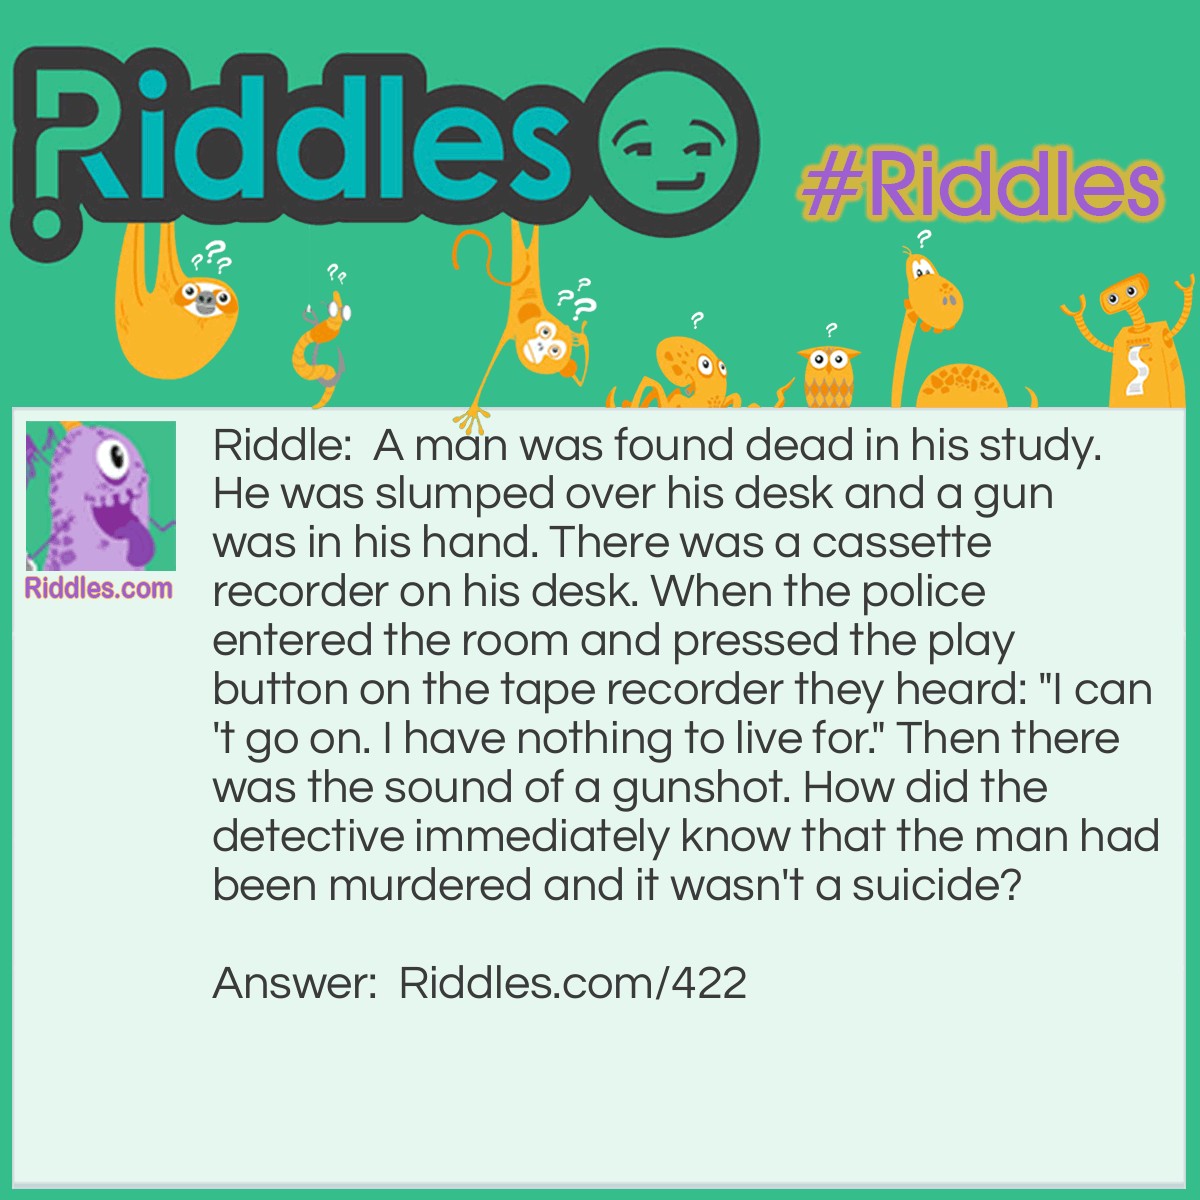 Riddle: A man was found dead in his study. He was slumped over his desk and a gun was in his hand. There was a cassette recorder on his desk. When the police entered the room and pressed the play button on the tape recorder they heard: "I can't go on. I have nothing to live for." Then there was the sound of a gunshot. How did the detective immediately know that the man had been murdered and it wasn't a suicide? Answer: The cassette had started at the beginning of the man's utterance. Someone else had to be there to rewind the tape.